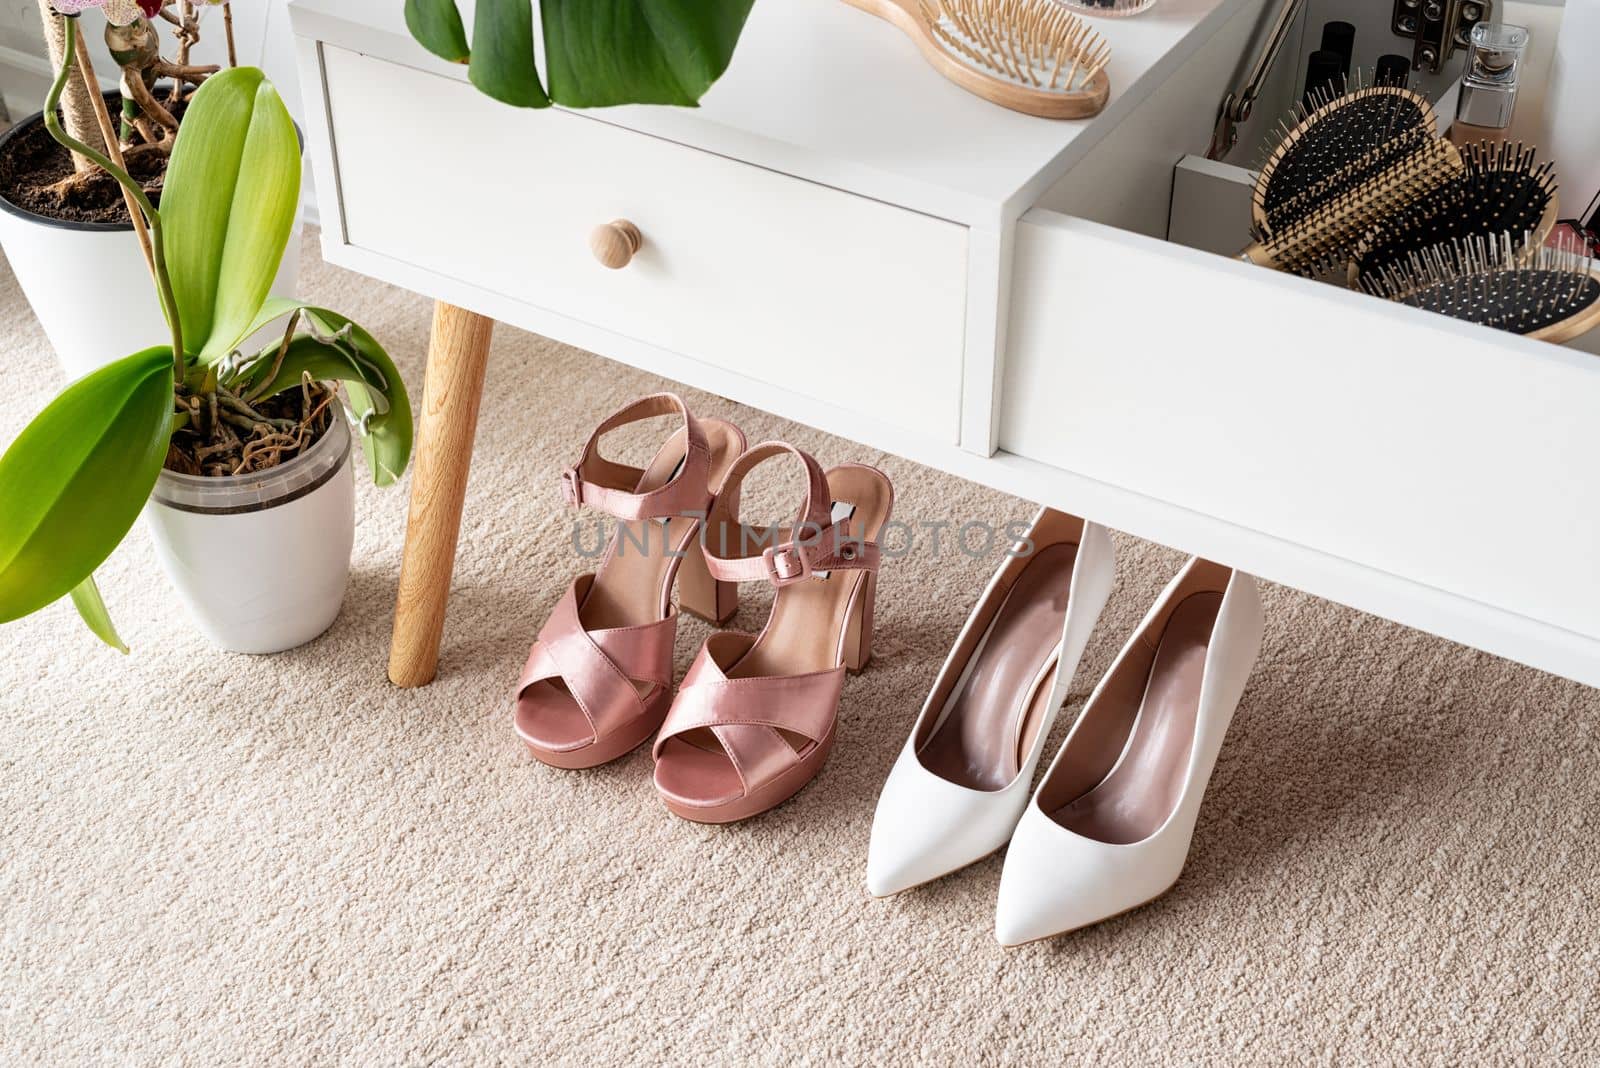 Stylish light room interior with elegant vanity table and plants, beauty and fashion. closeup of elegant high heel shoes standing under feminine dressing table